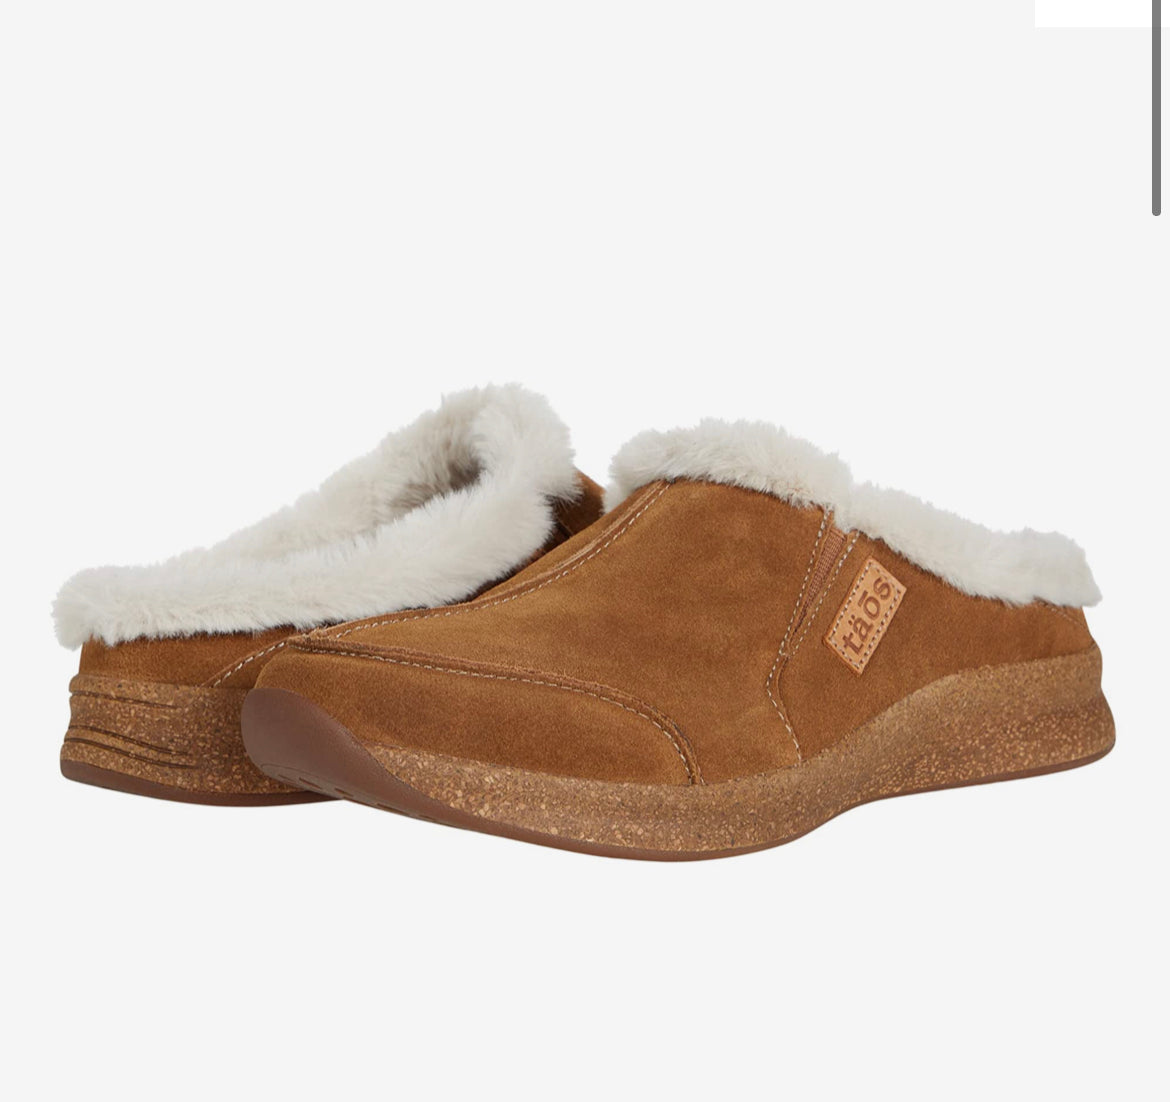 Taos Future Chestnut Suede Women’s - All Mixed Up 